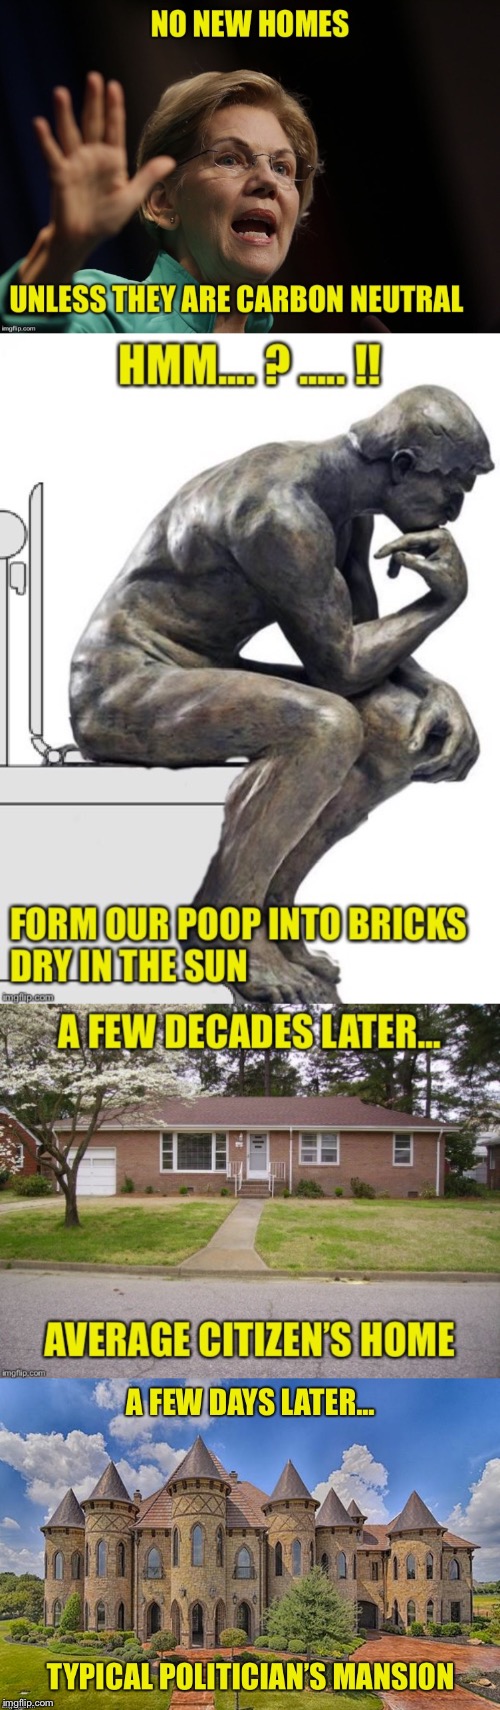 If Elizabeth Warren Were President, We’d All Be Pooping Bricks | image tagged in warren,election,climate,carbon neutral | made w/ Imgflip meme maker